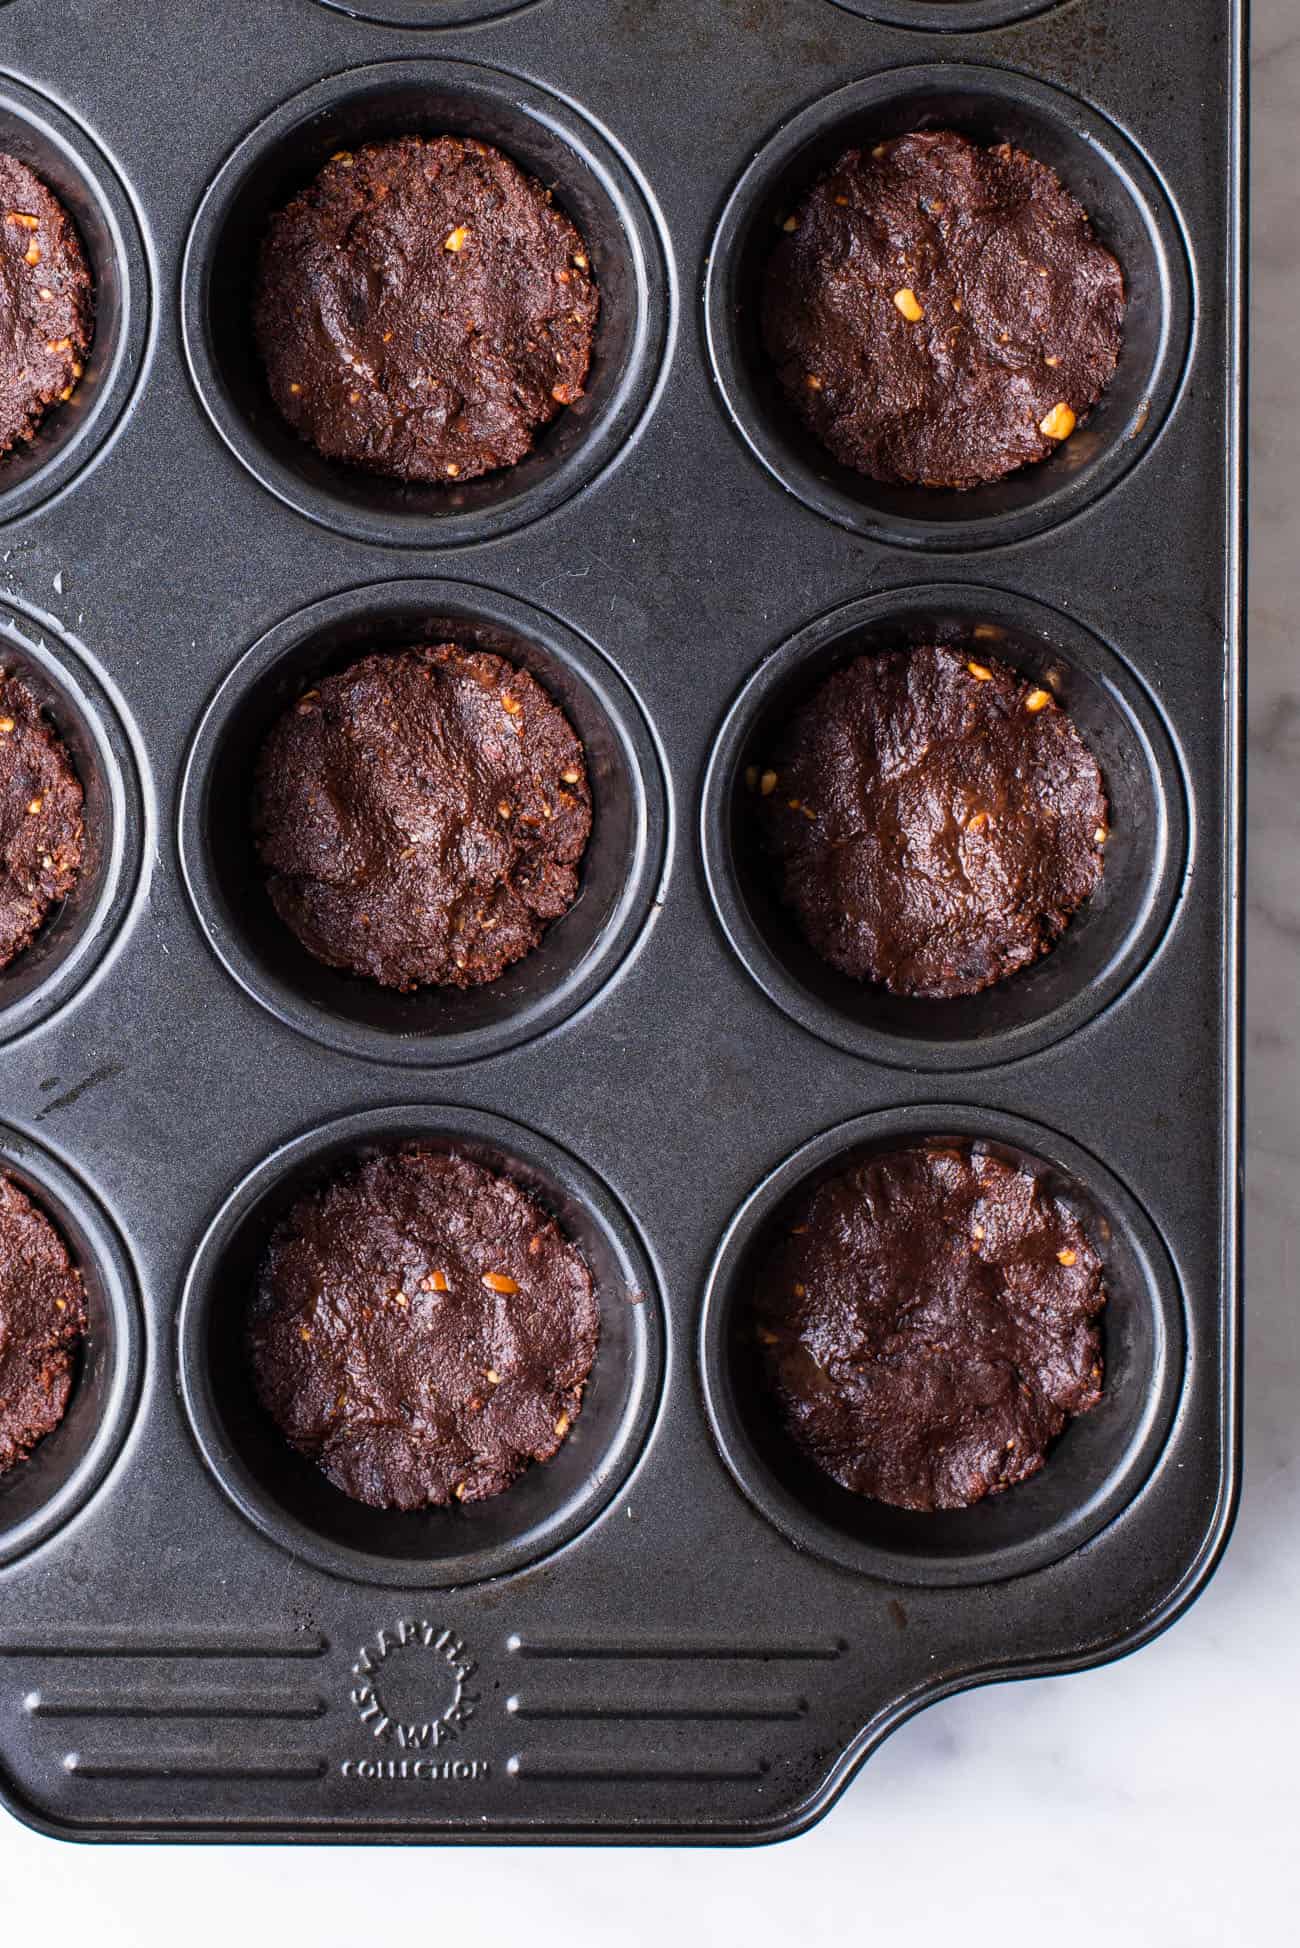 Sugar-free date brownies scooped into muffin tin, ready to be baked